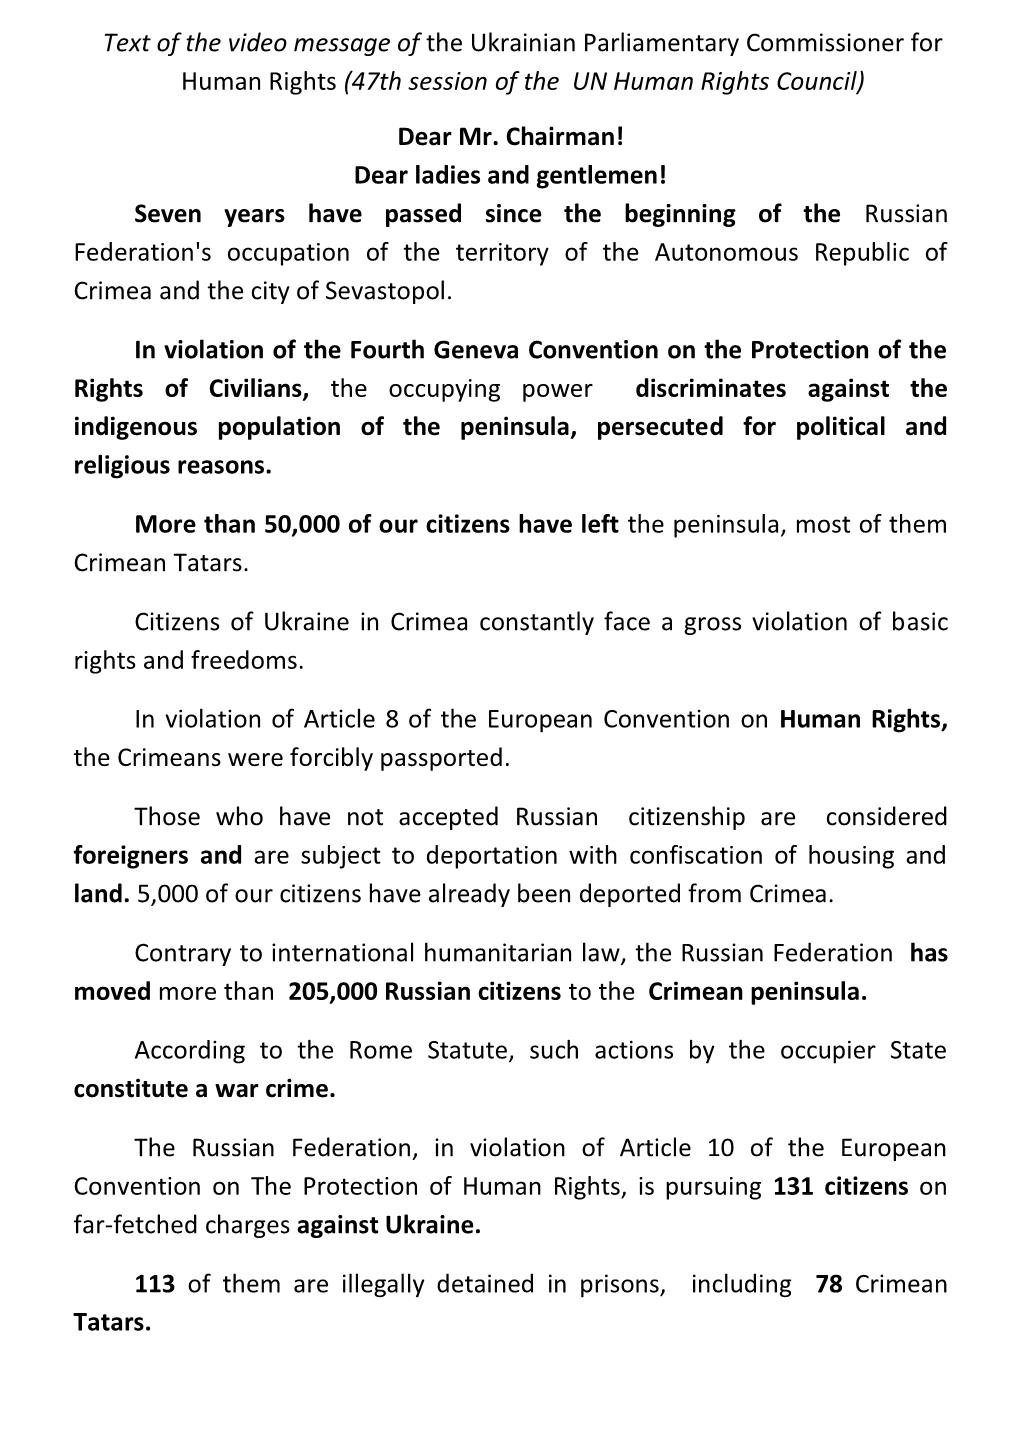 Text of the Video Message of the Ukrainian Parliamentary Commissioner for Human Rights (47Th Session of the UN Human Rights Council)